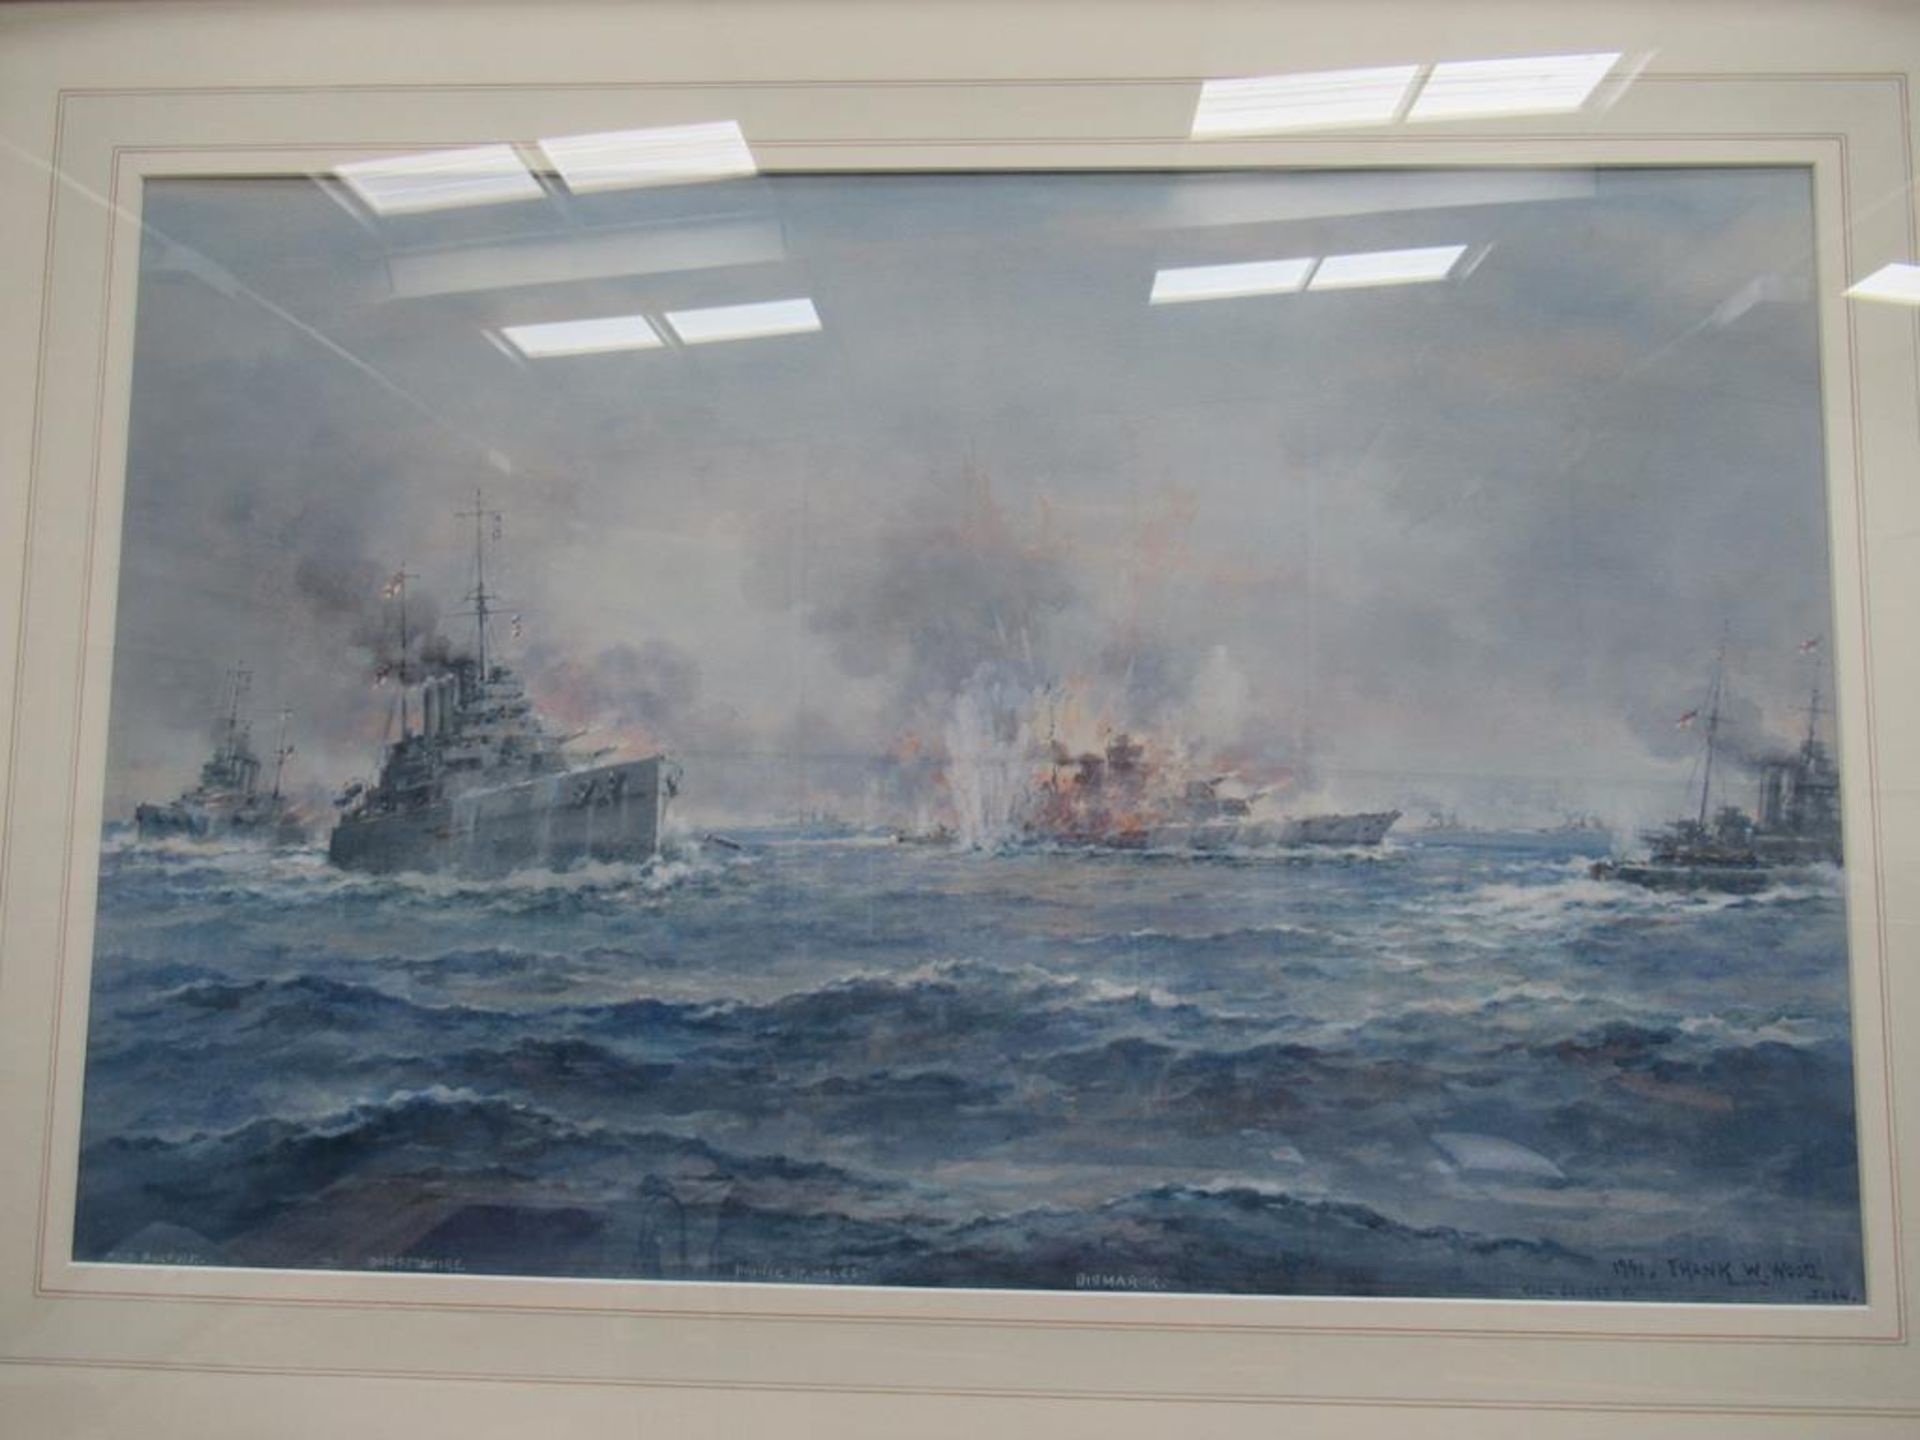 Water Colour 'The End of the Bismarck' signed and dated by Frank Wood 1941 (47cm x 73cm) - Image 2 of 3